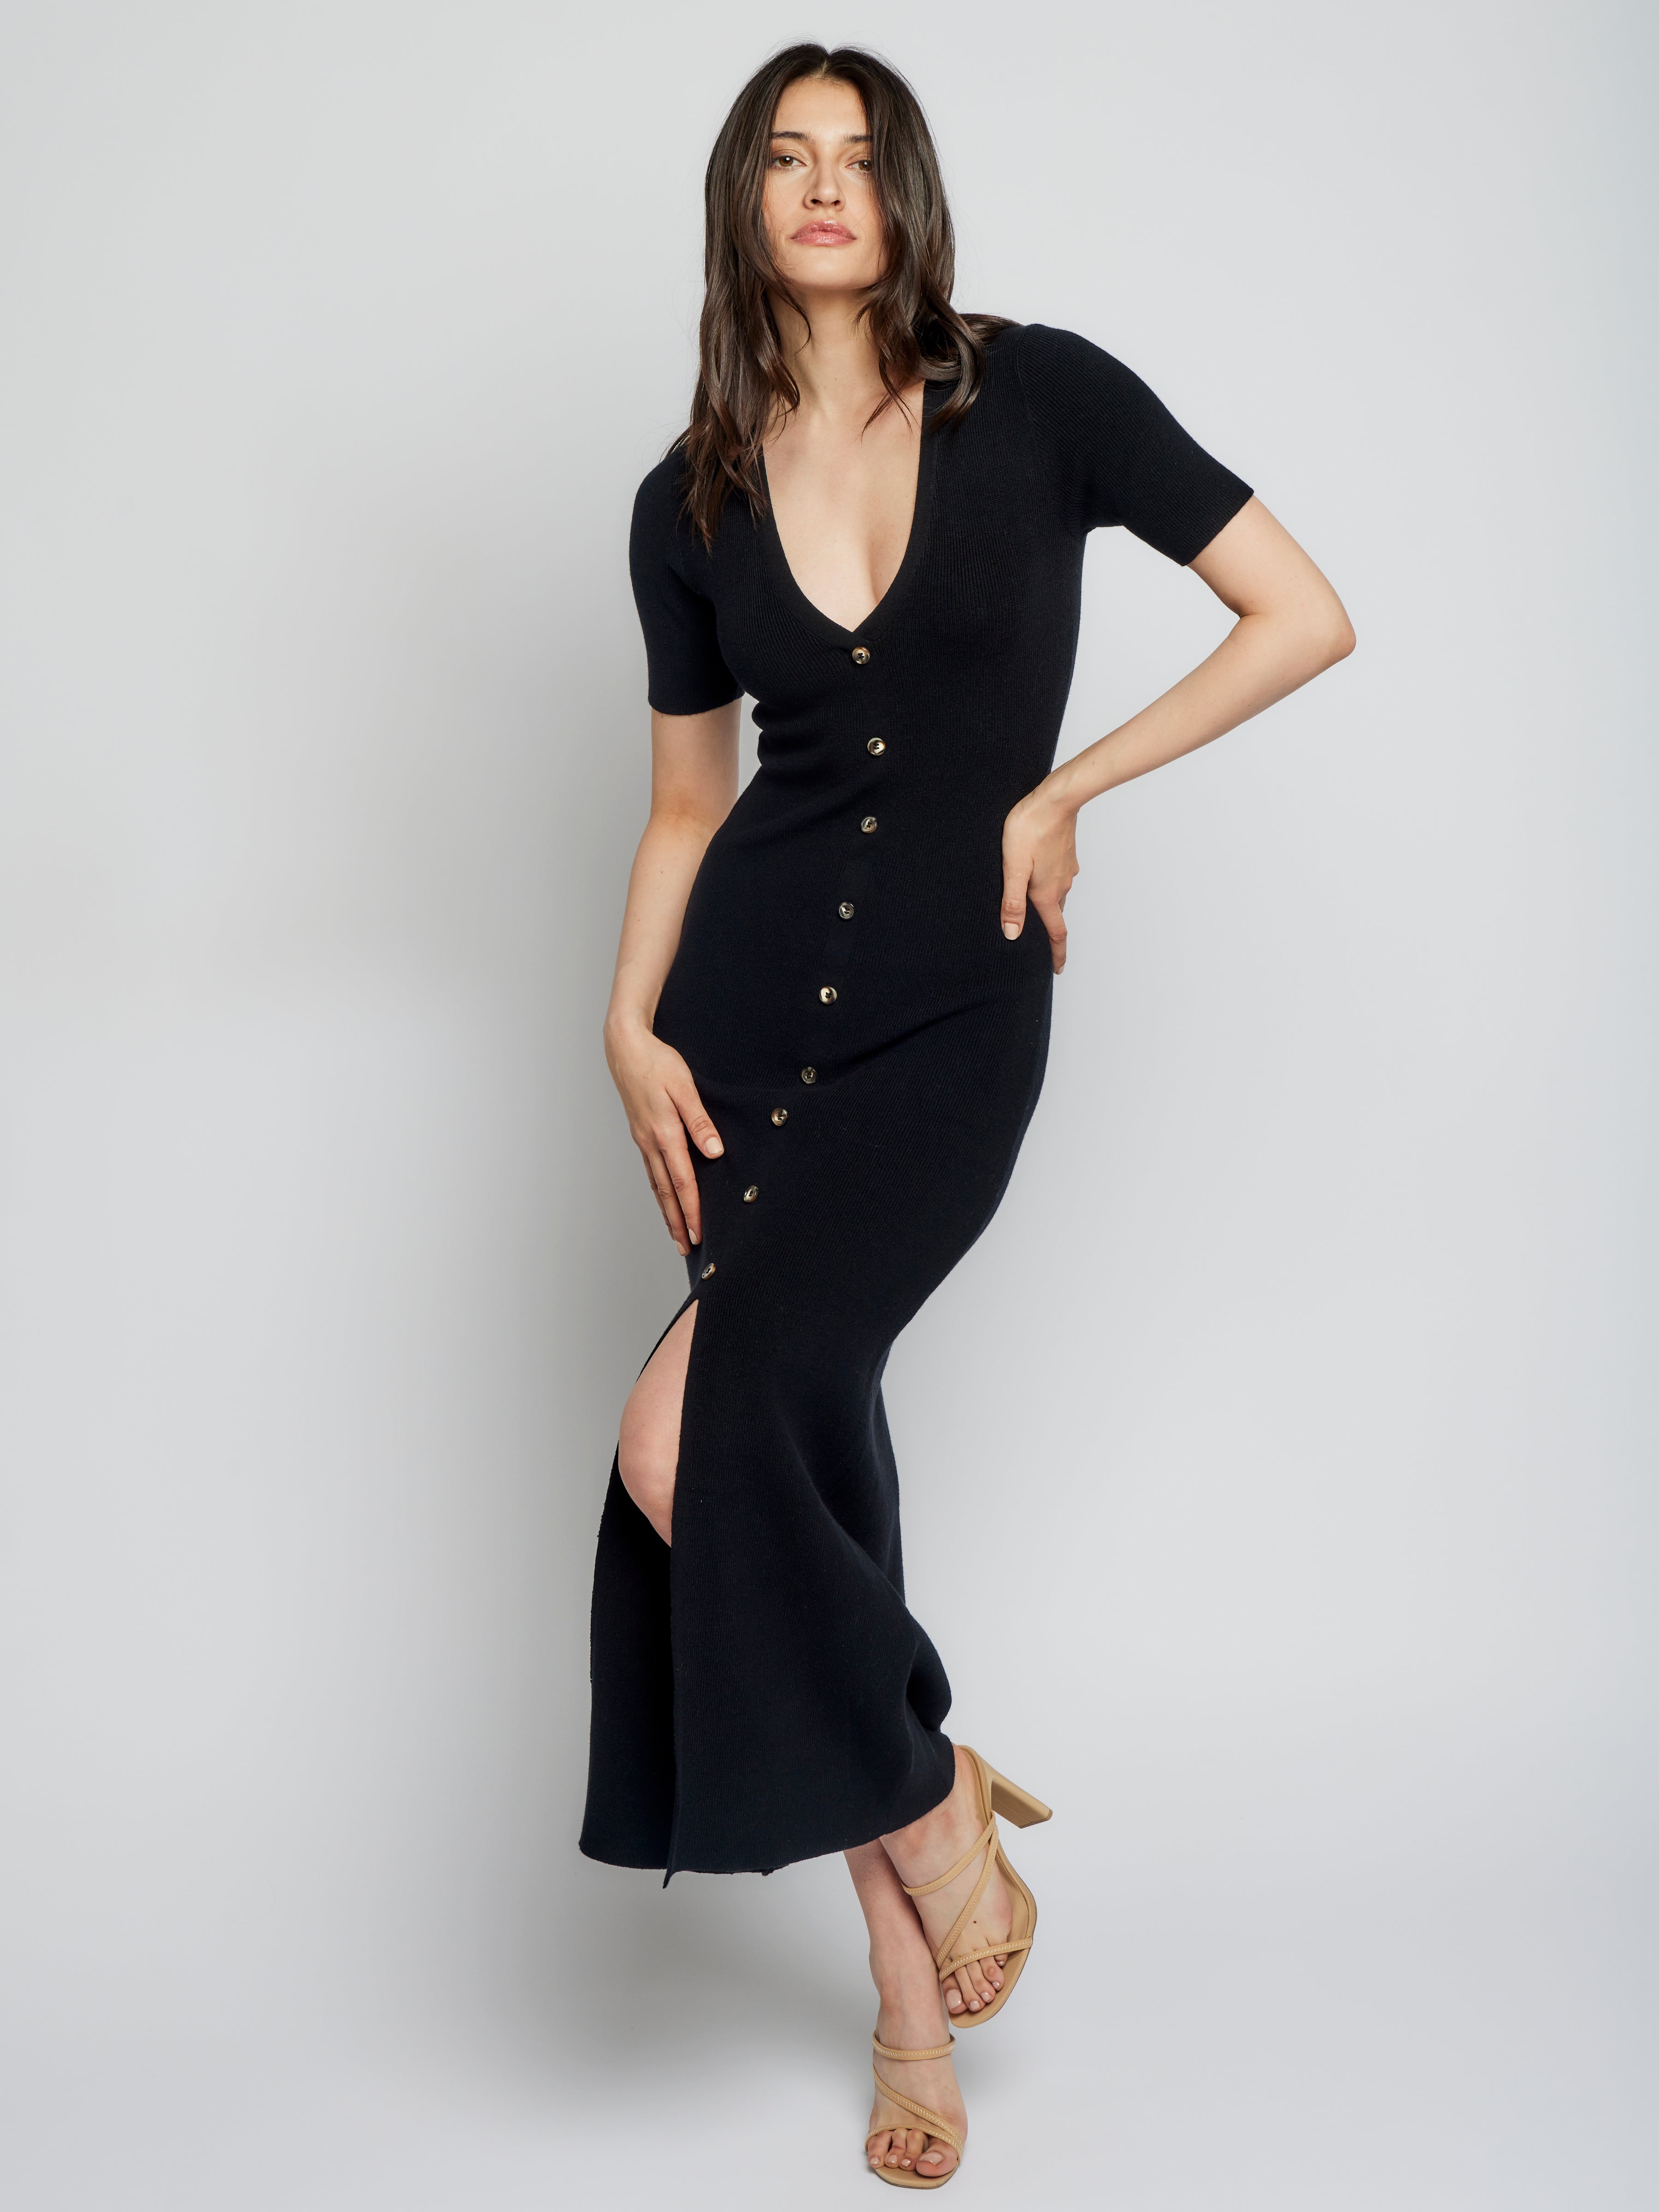 short sleeve, button down midi dress with a deep V-neck and figure hugging fit in black